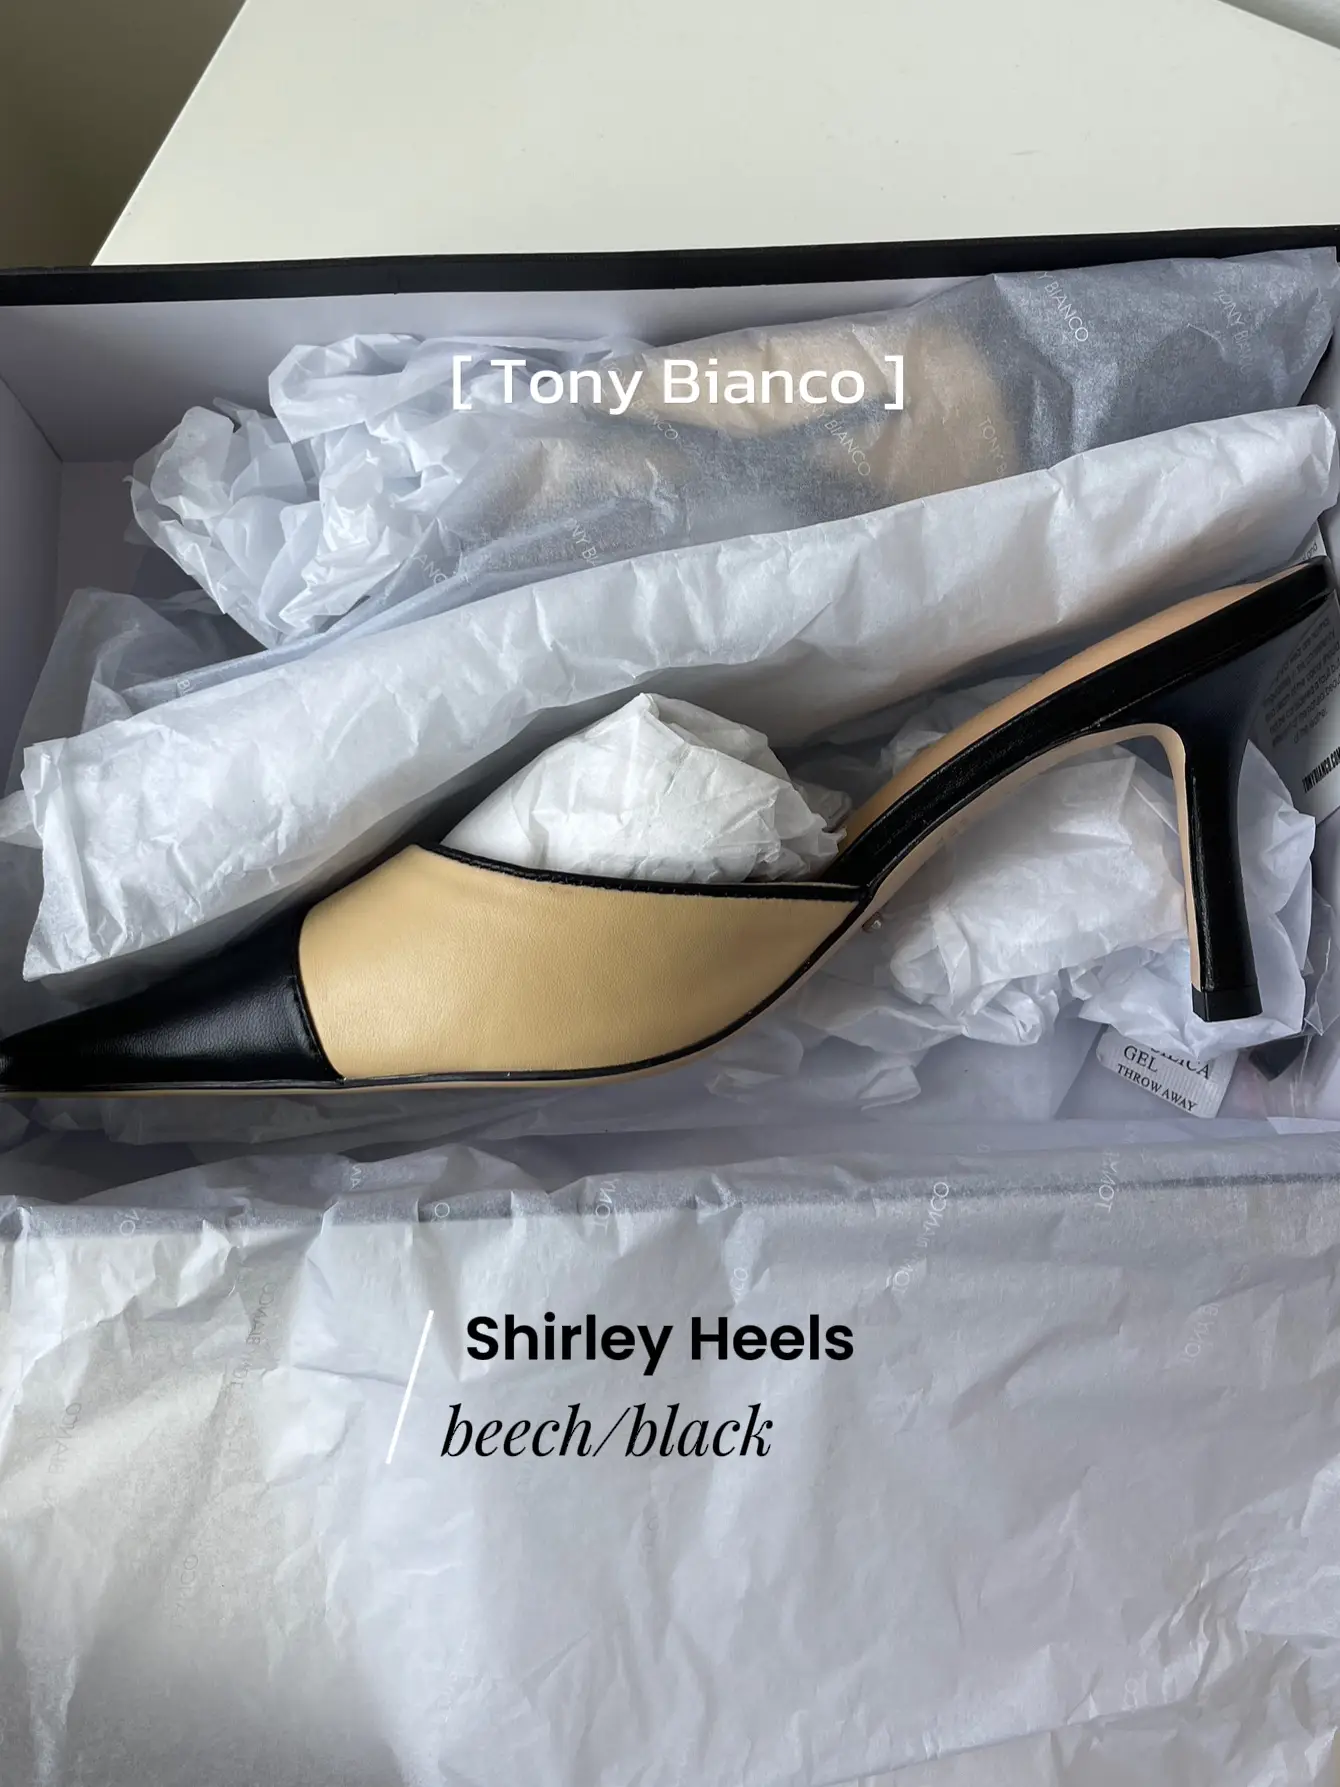 Tony Bianco heels👠, Gallery posted by Siera Alexis